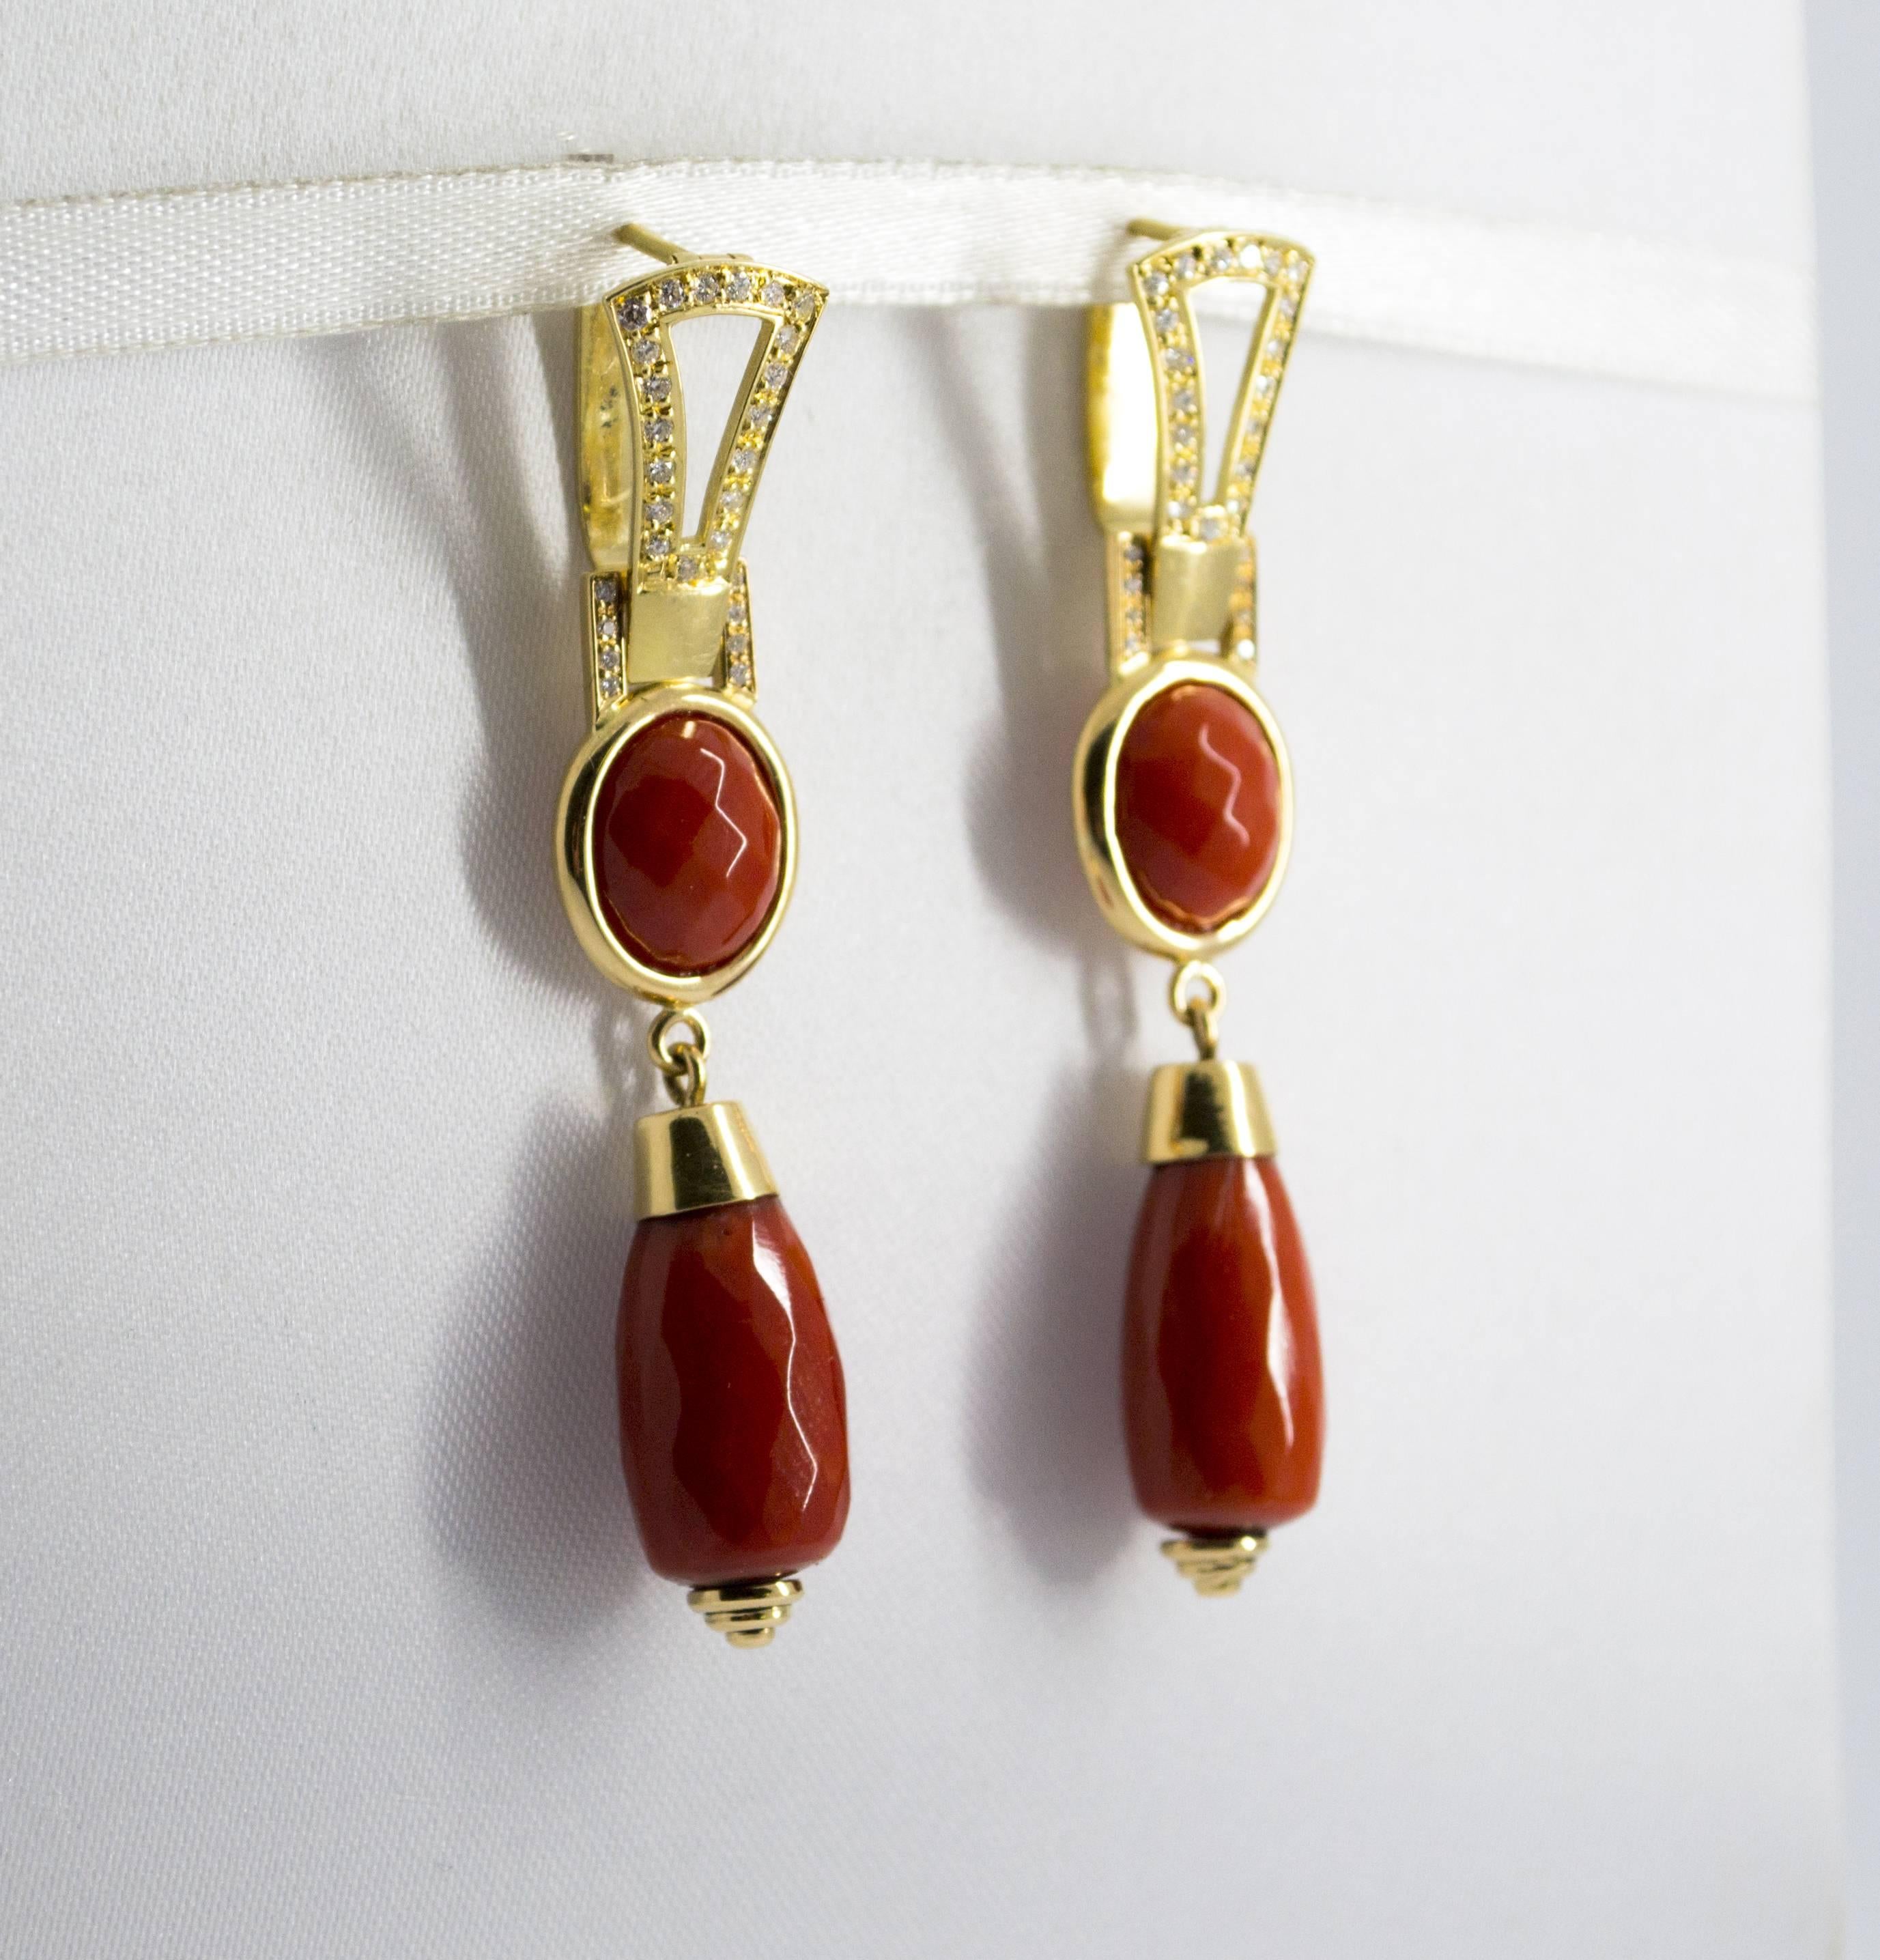 Renaissance Mediterranean Red Coral 0.40 Carat White Diamond Yellow Gold Lever-Back Earrings